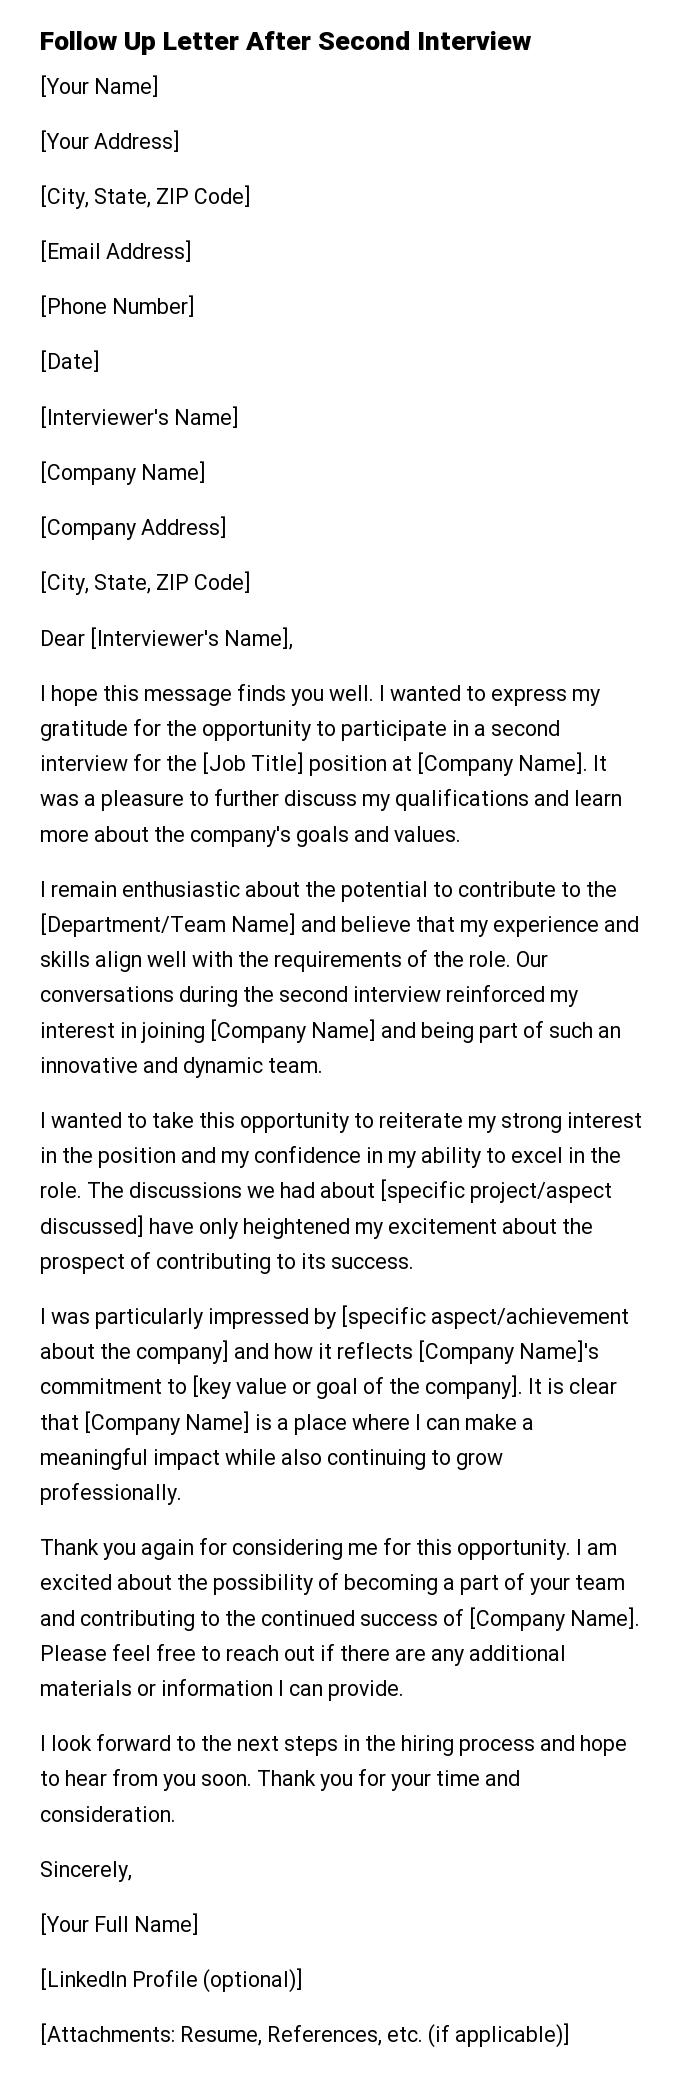 Follow Up Letter After Second Interview